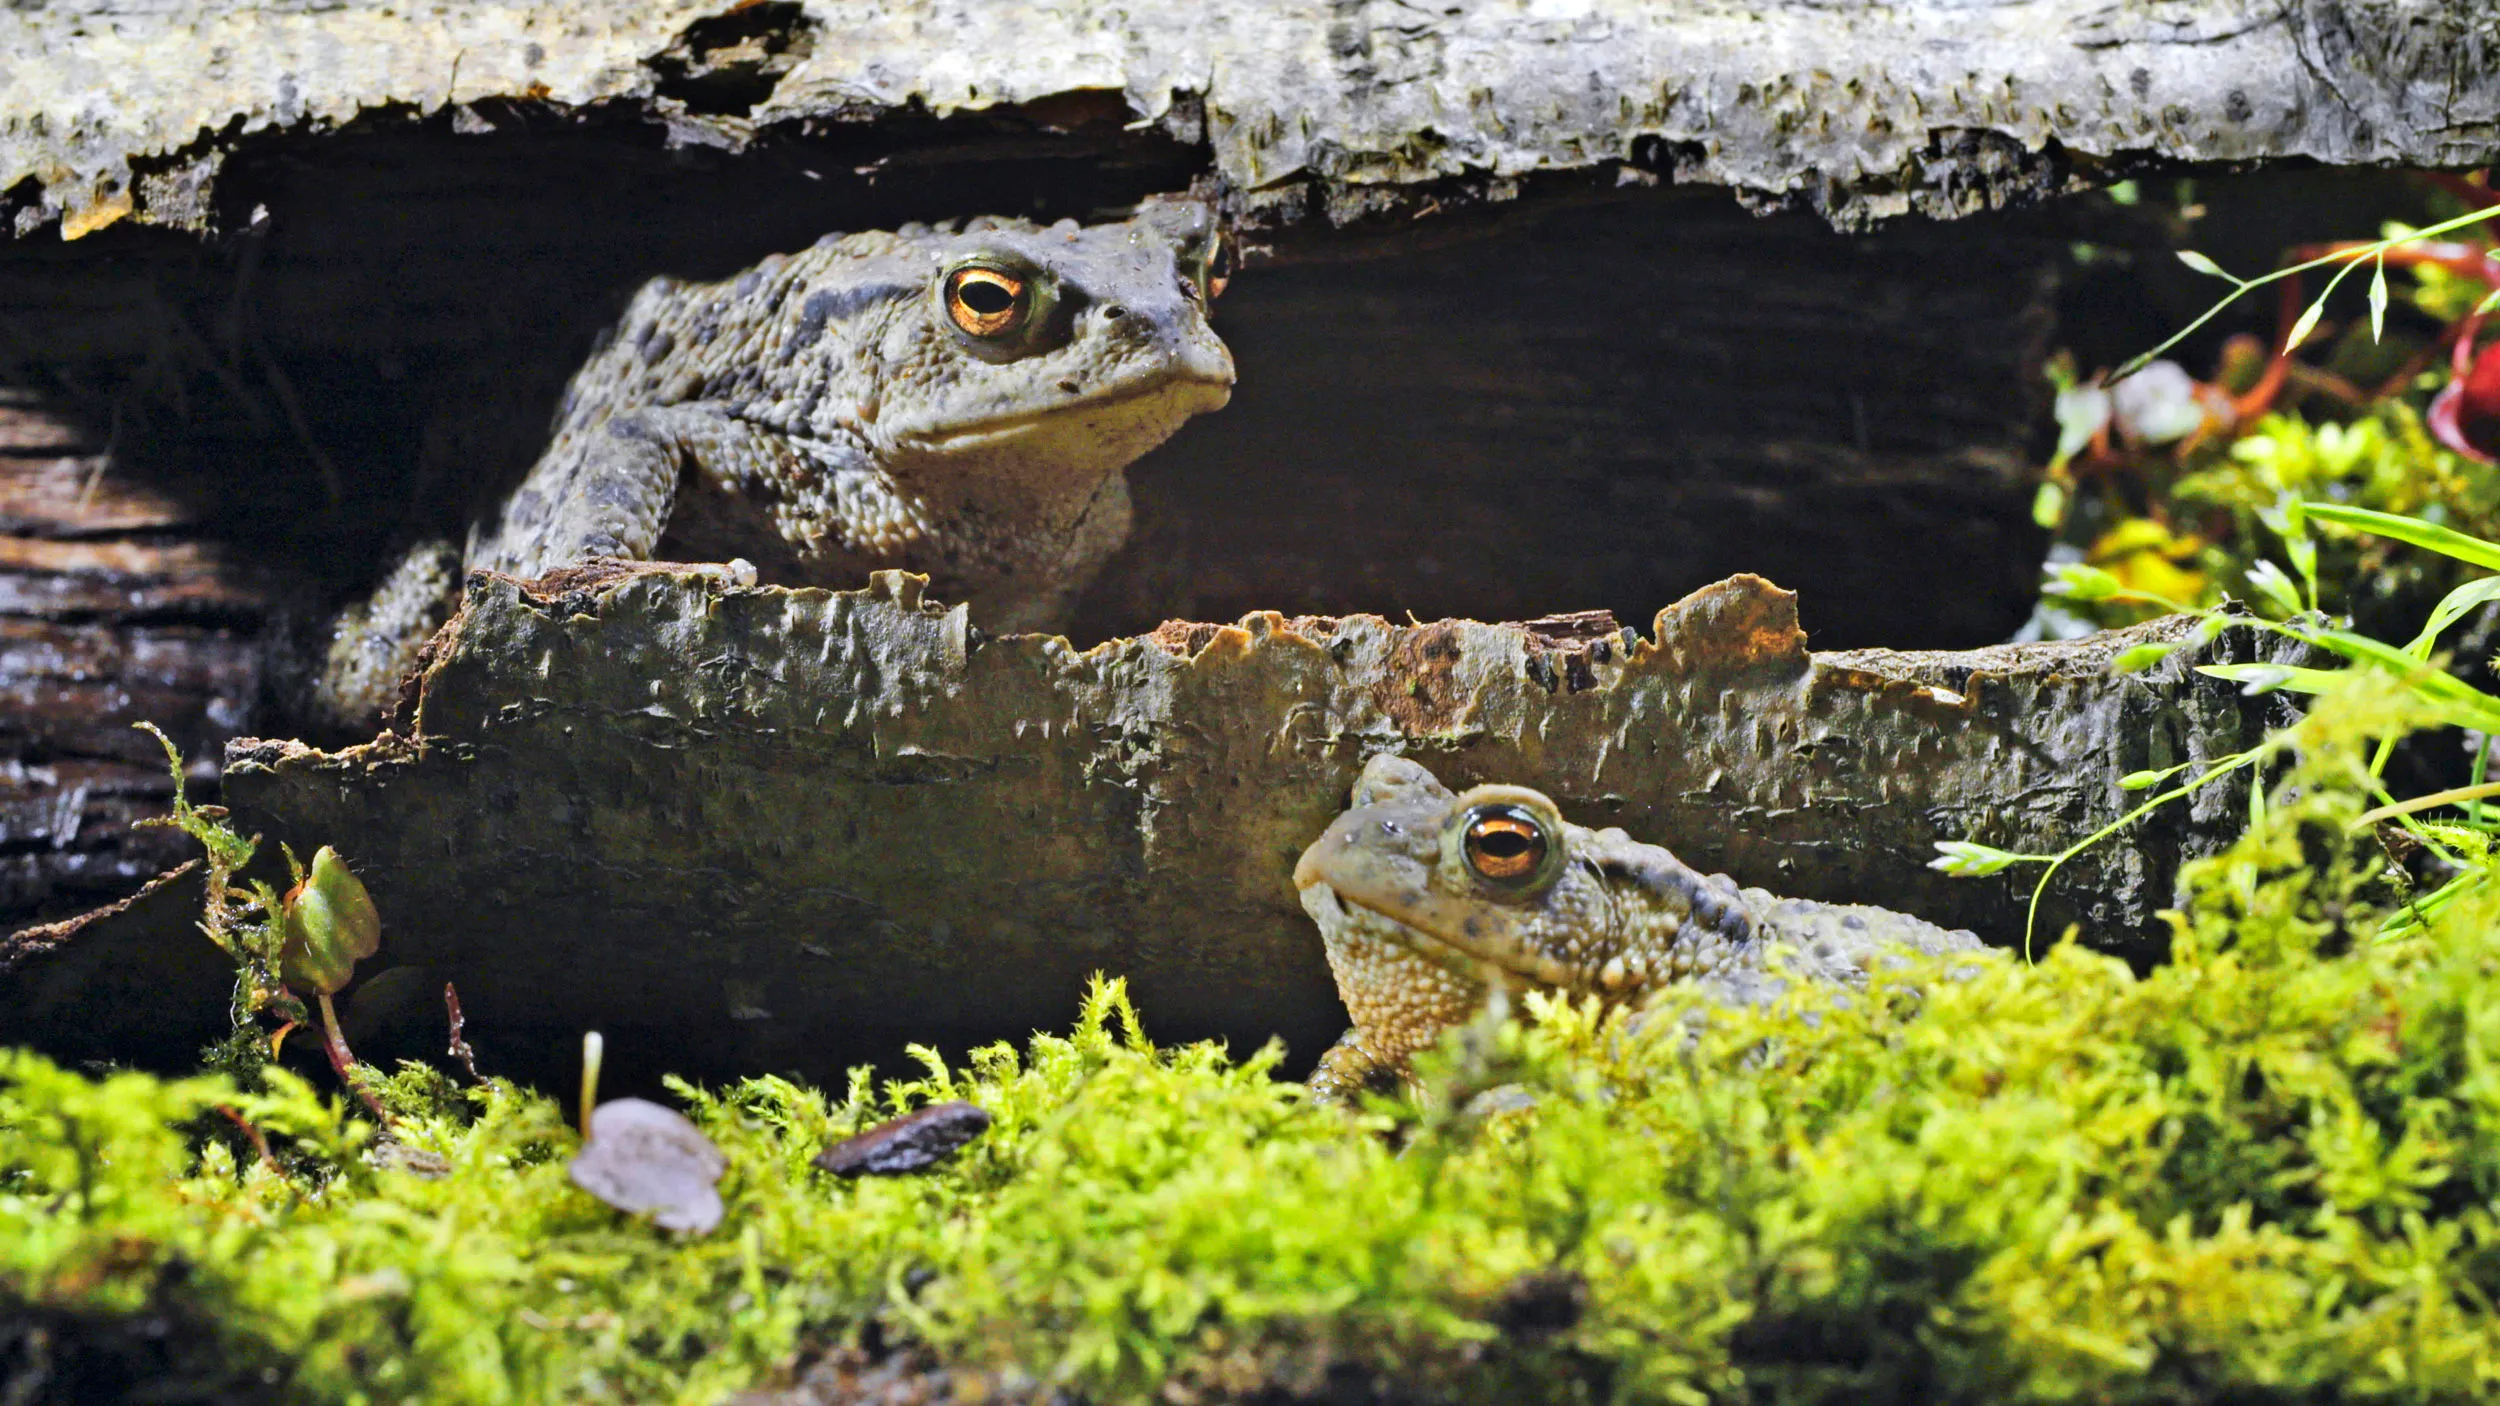 Two Common Toads, one sat inside a hollowed out log and the other in the foreground on some moss.